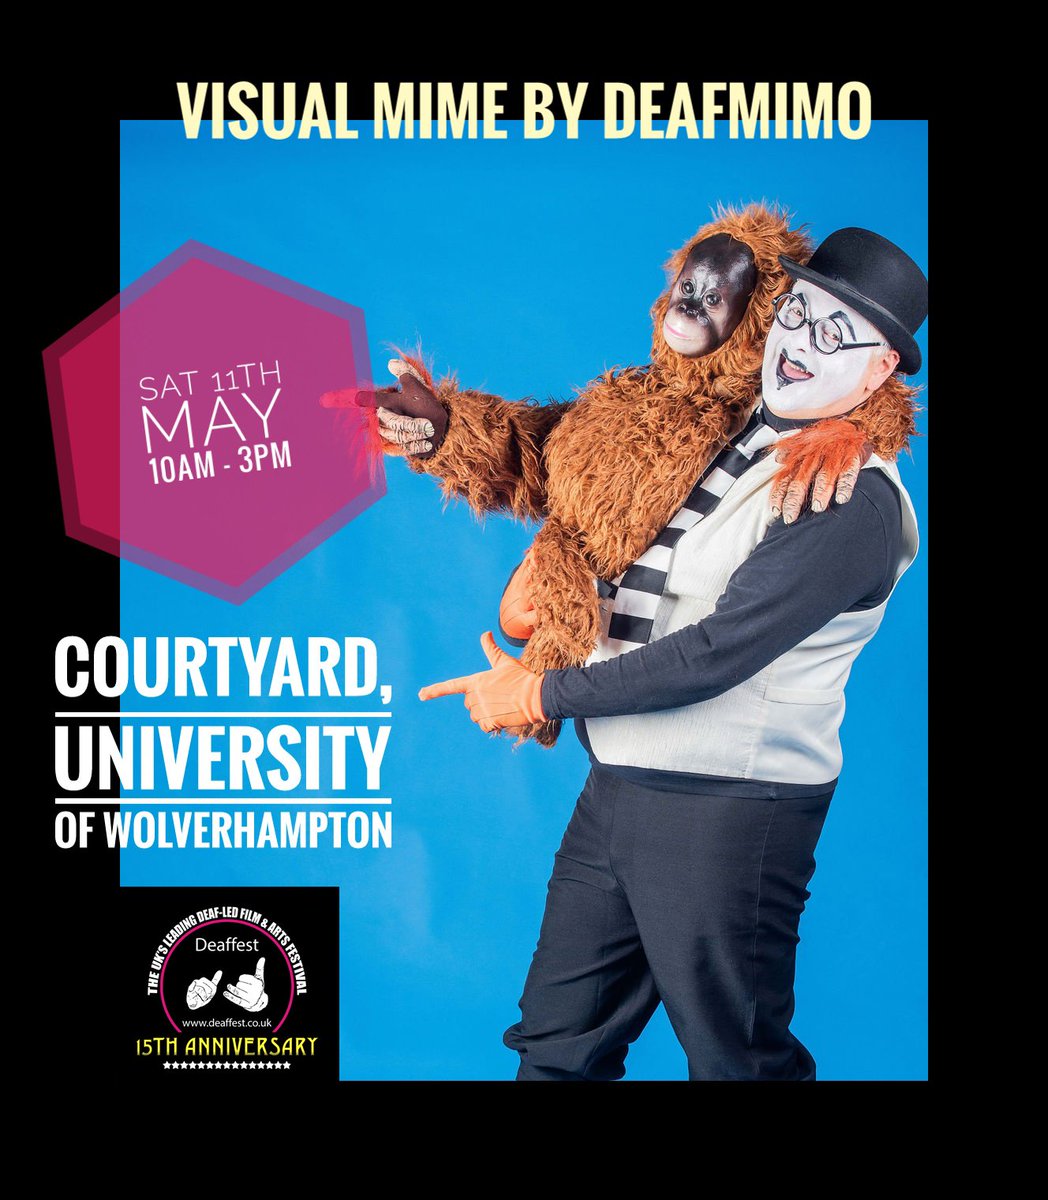 👀 out for DeafMimo around the courtyard at #Deaffest 2024! He will entertain you with his impressive miming skills along with his Charlie Chaplin-inspired facial expressions + comical movements. His pal, the orangutang, will also be delighted to meet you! #TuneintoDeaffests15th